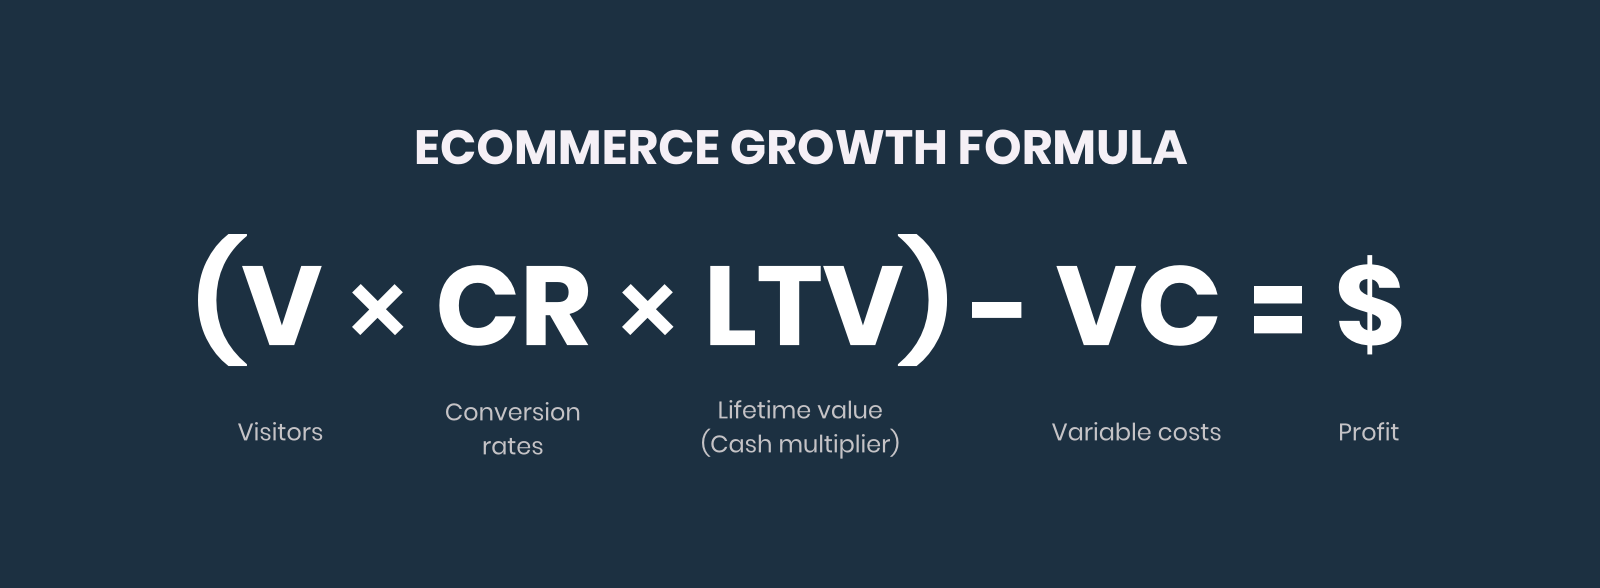 Ecommerce Growth Formula: Visitors times Conversion Rate times Lifetime Value (Cash Multiplier, or 60-day LTV) minus Variable Costs equals Profit